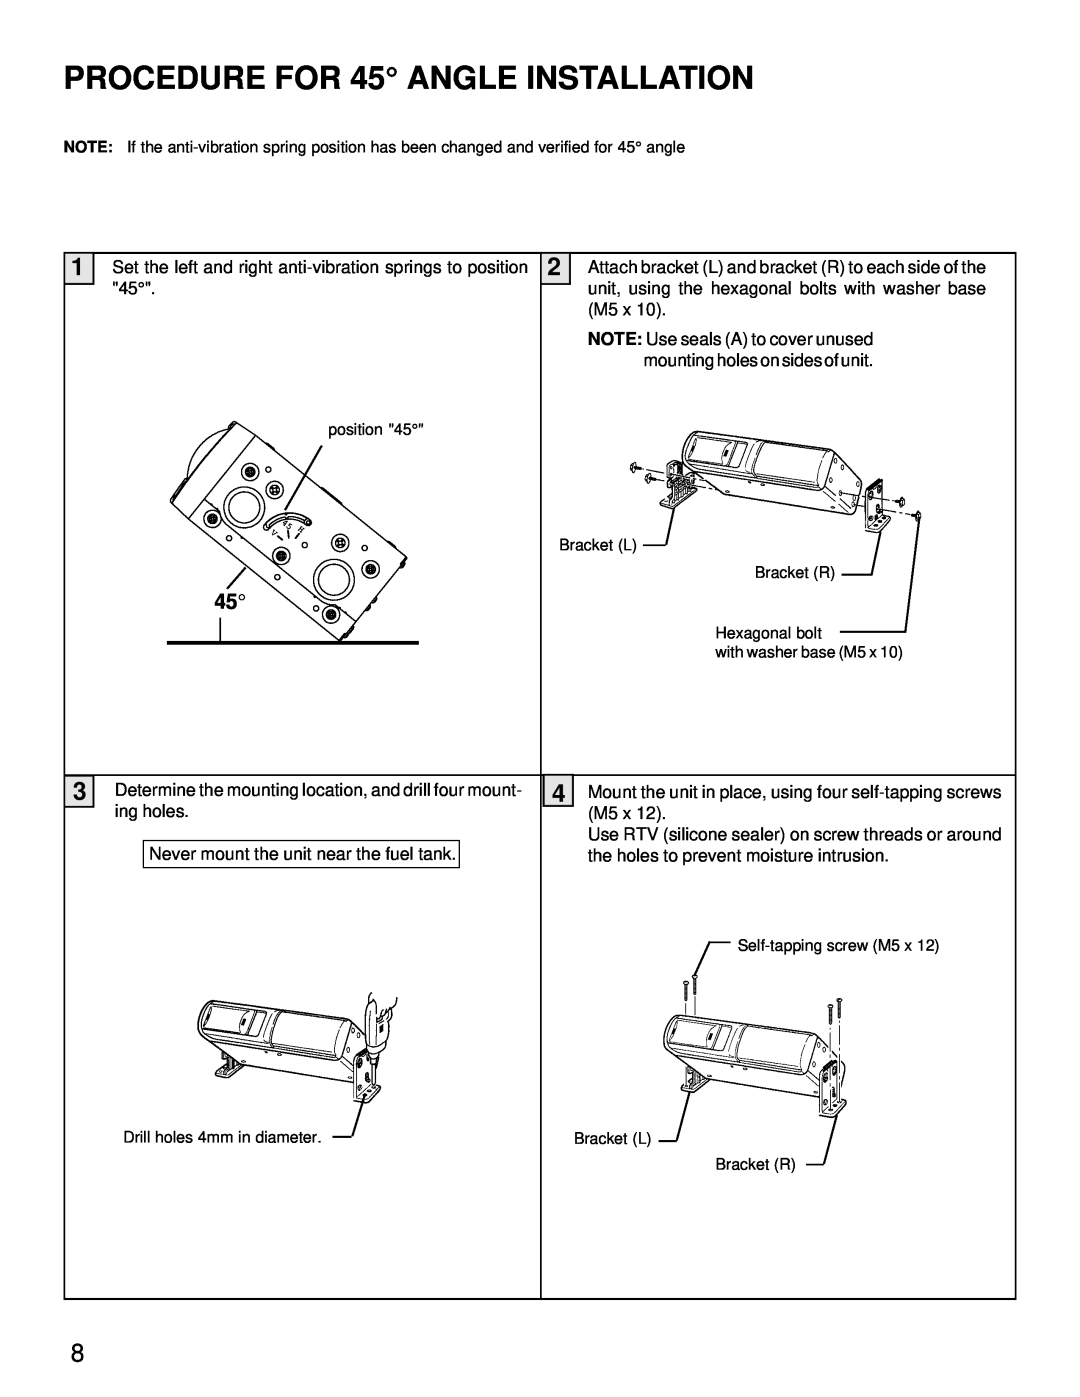 Audiovox ACC-52 owner manual PROCEDURE FOR 45 ANGLE INSTALLATION 